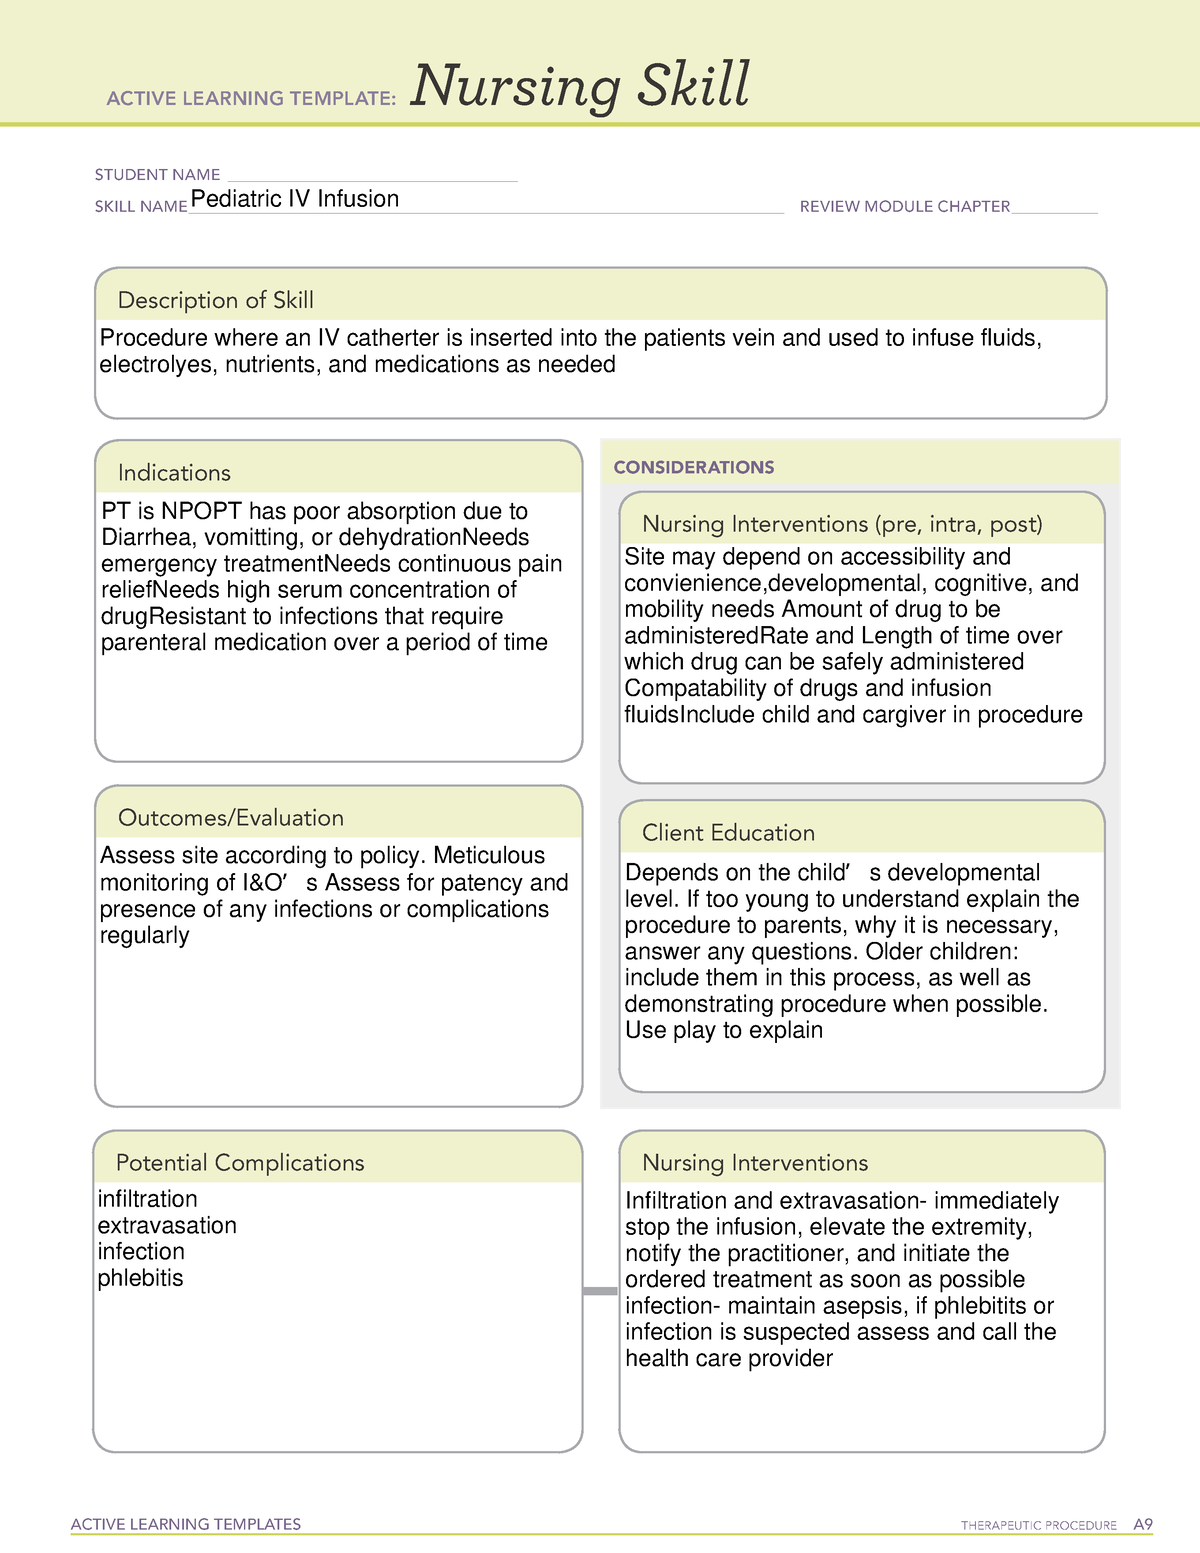 Active Learning Template Nursing Skill formiv ACTIVE LEARNING